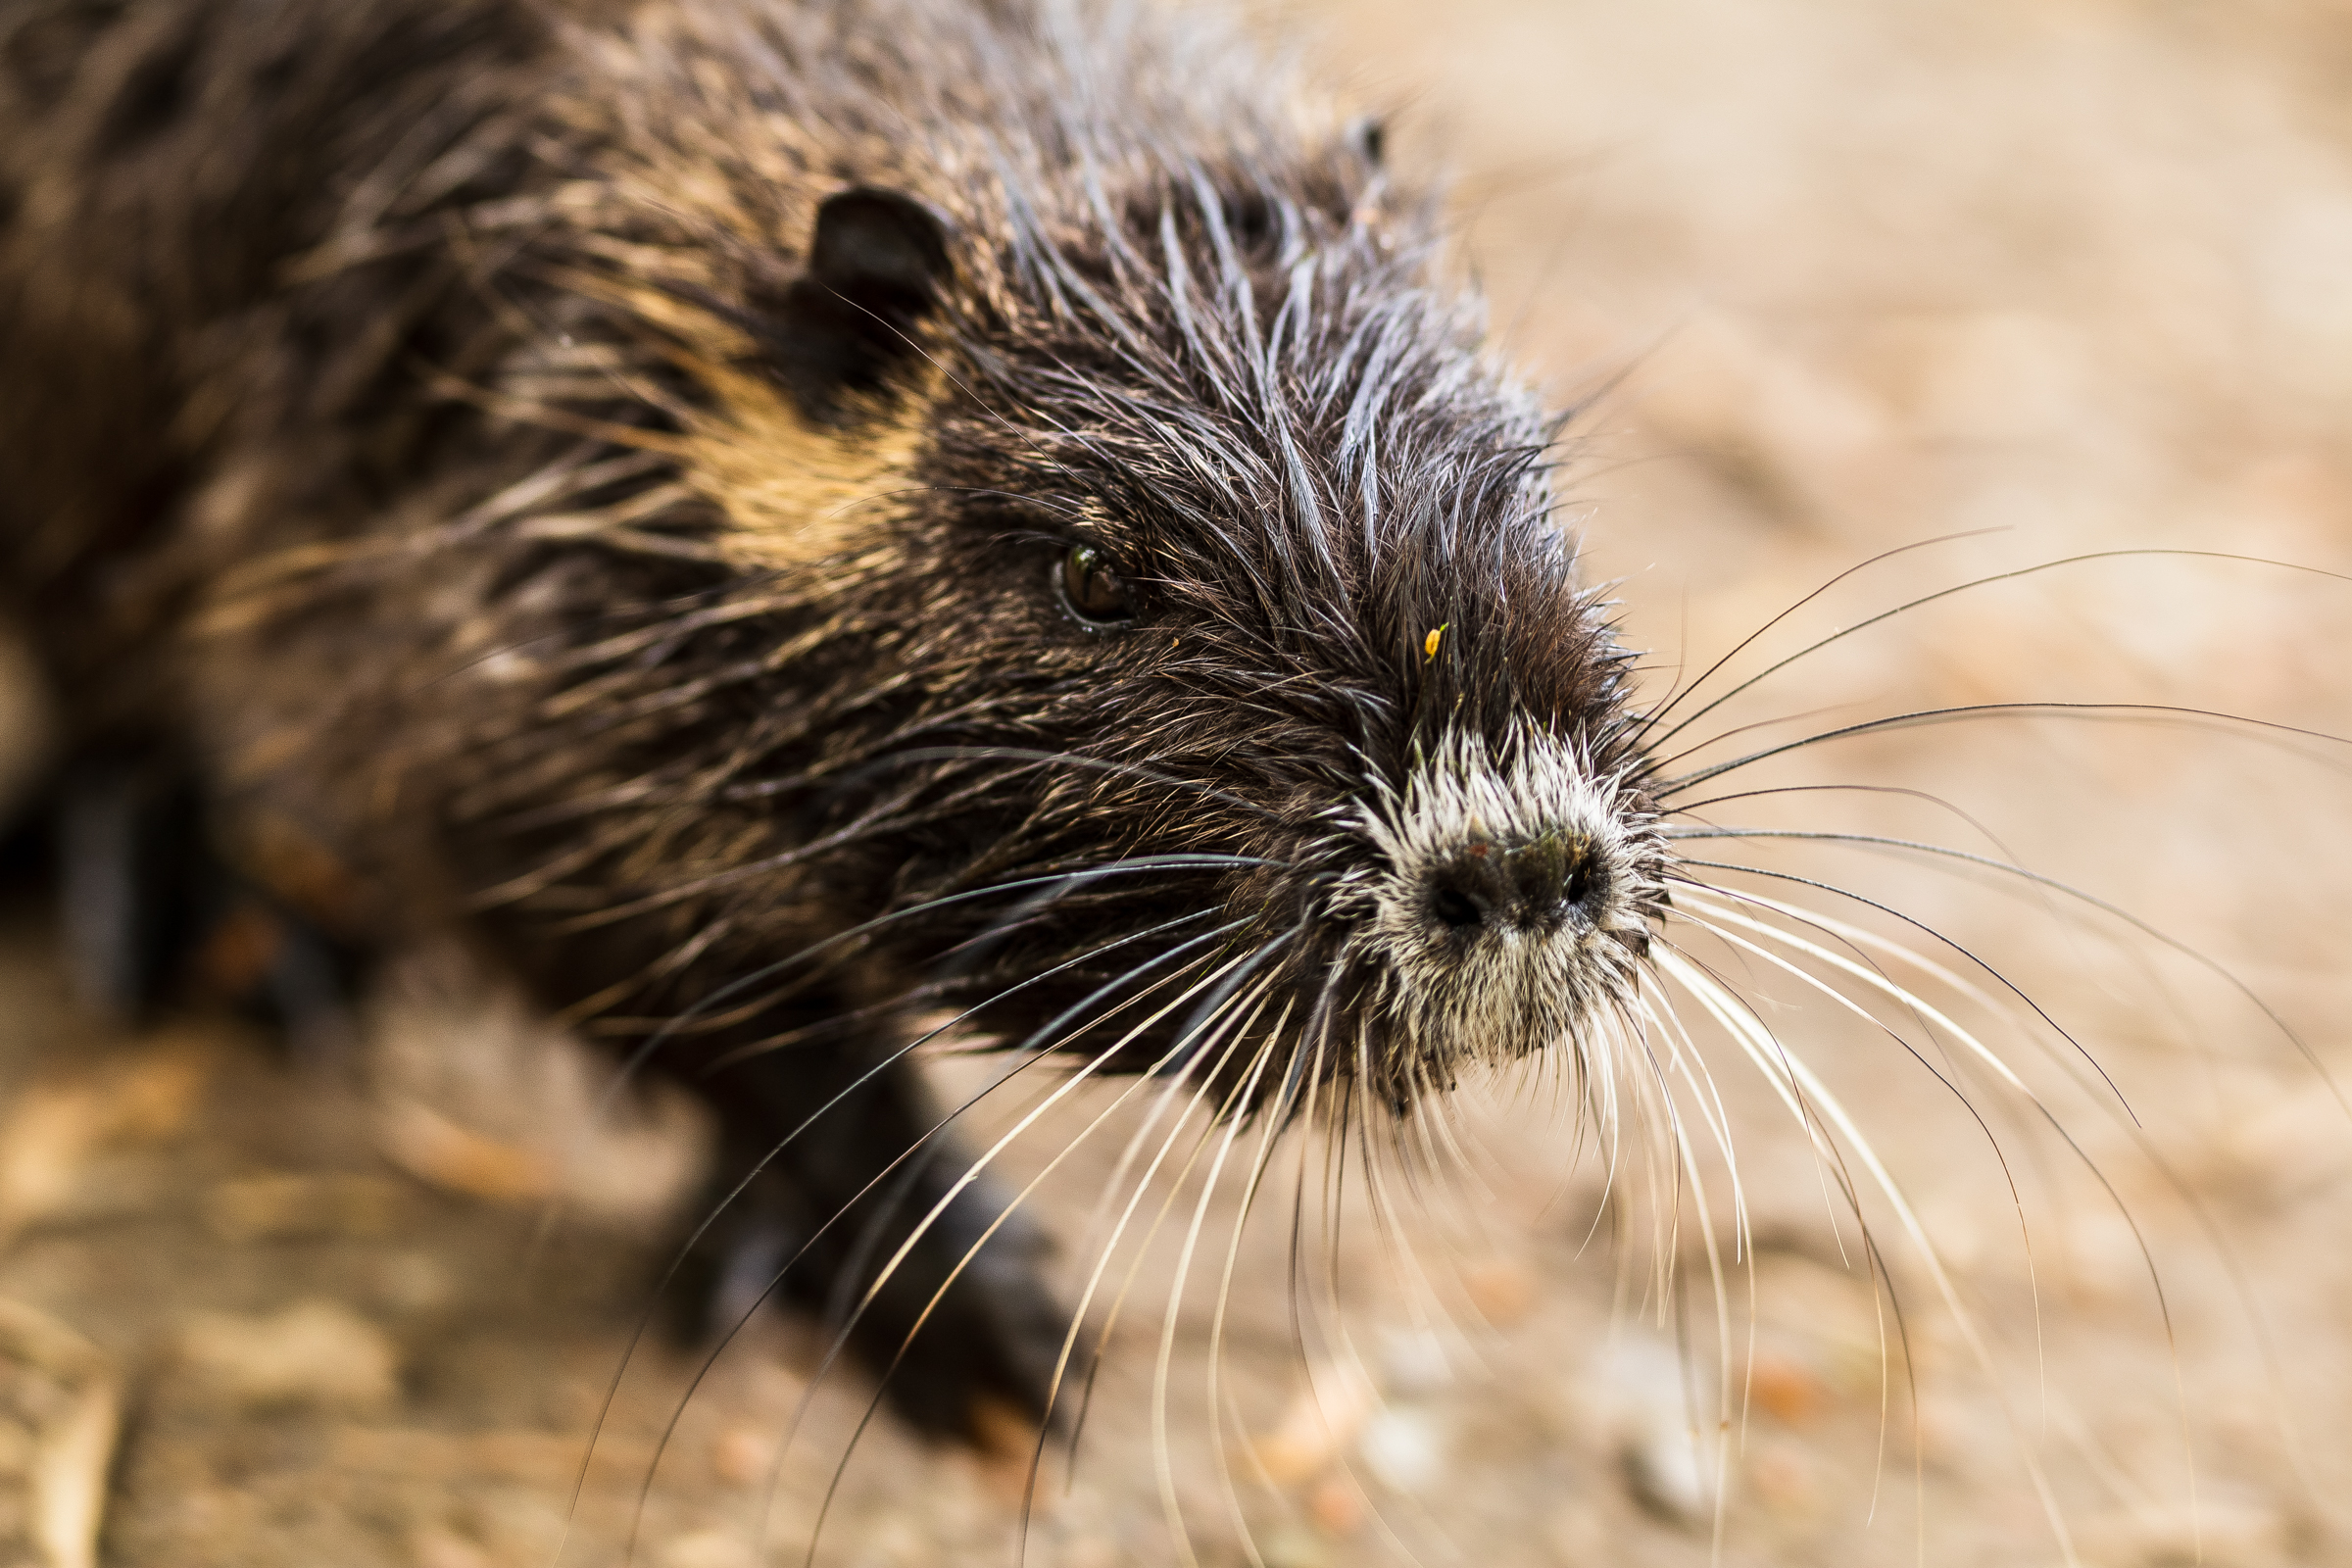 A close-up of a young nutria (cuypu) with brown fur.